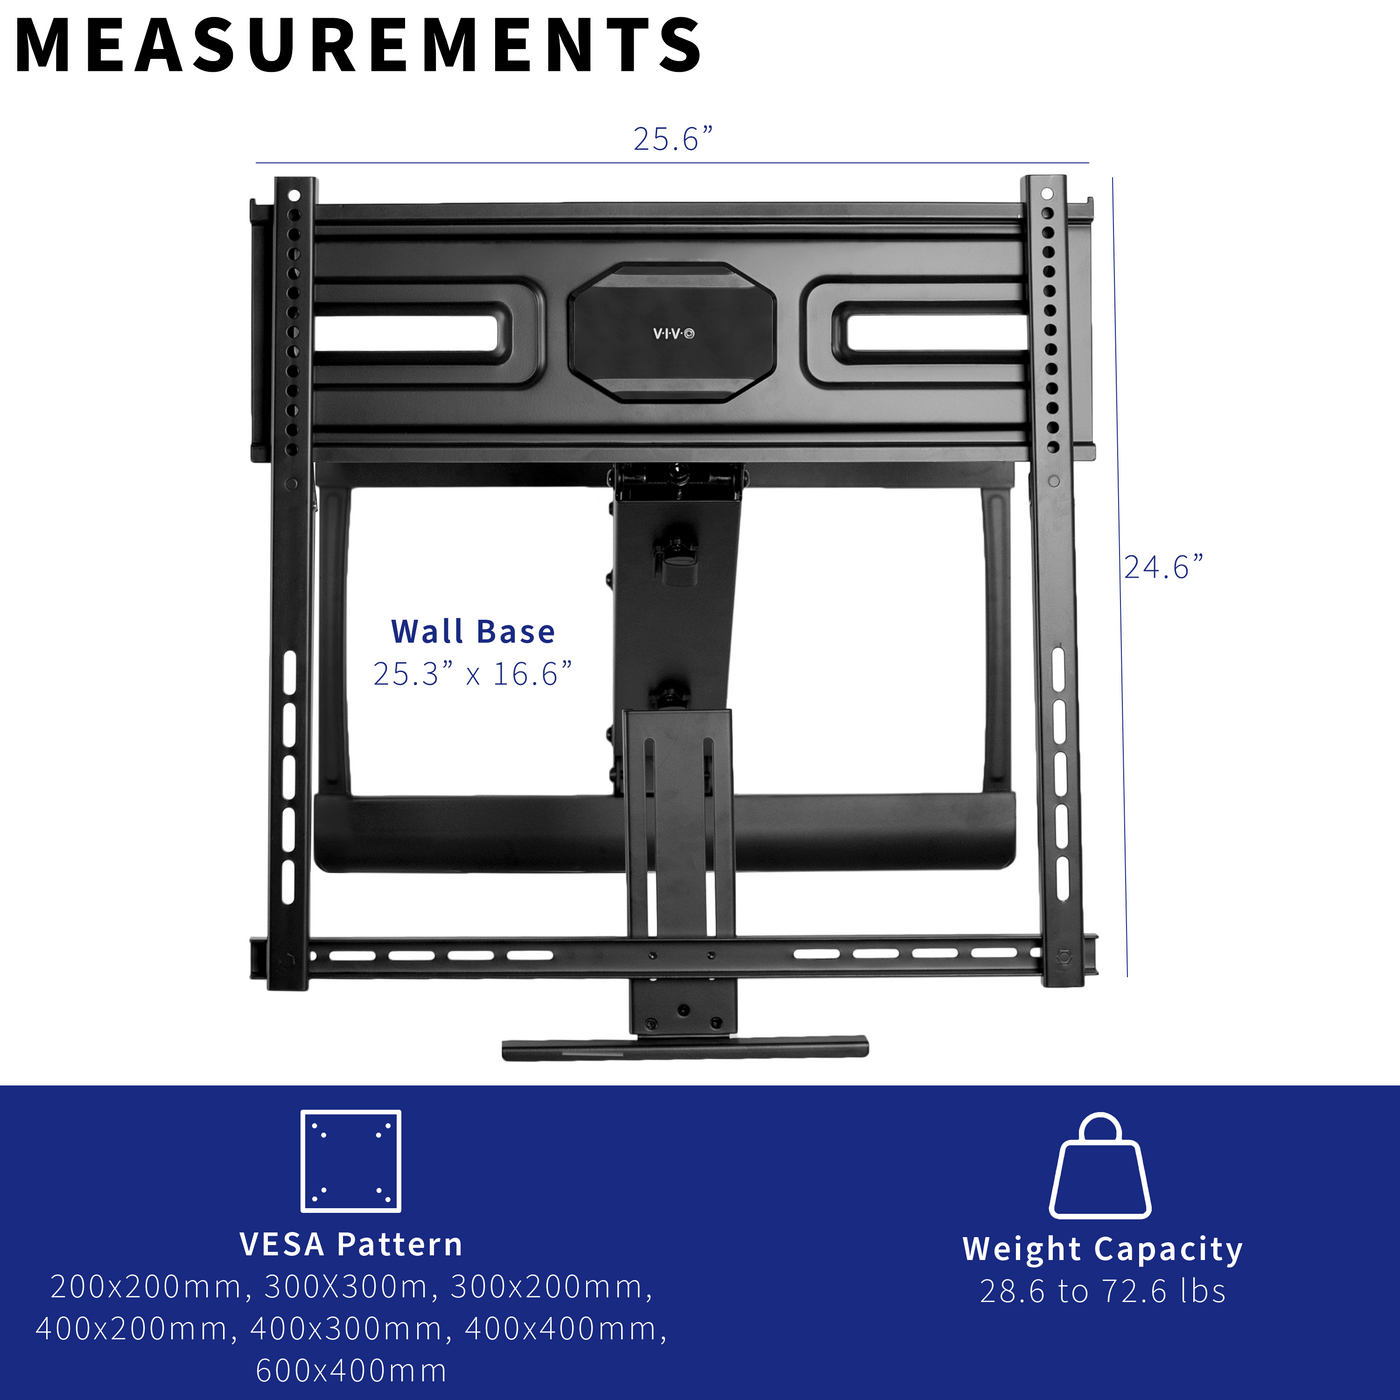 Measurements and compatibility specification of the mount.